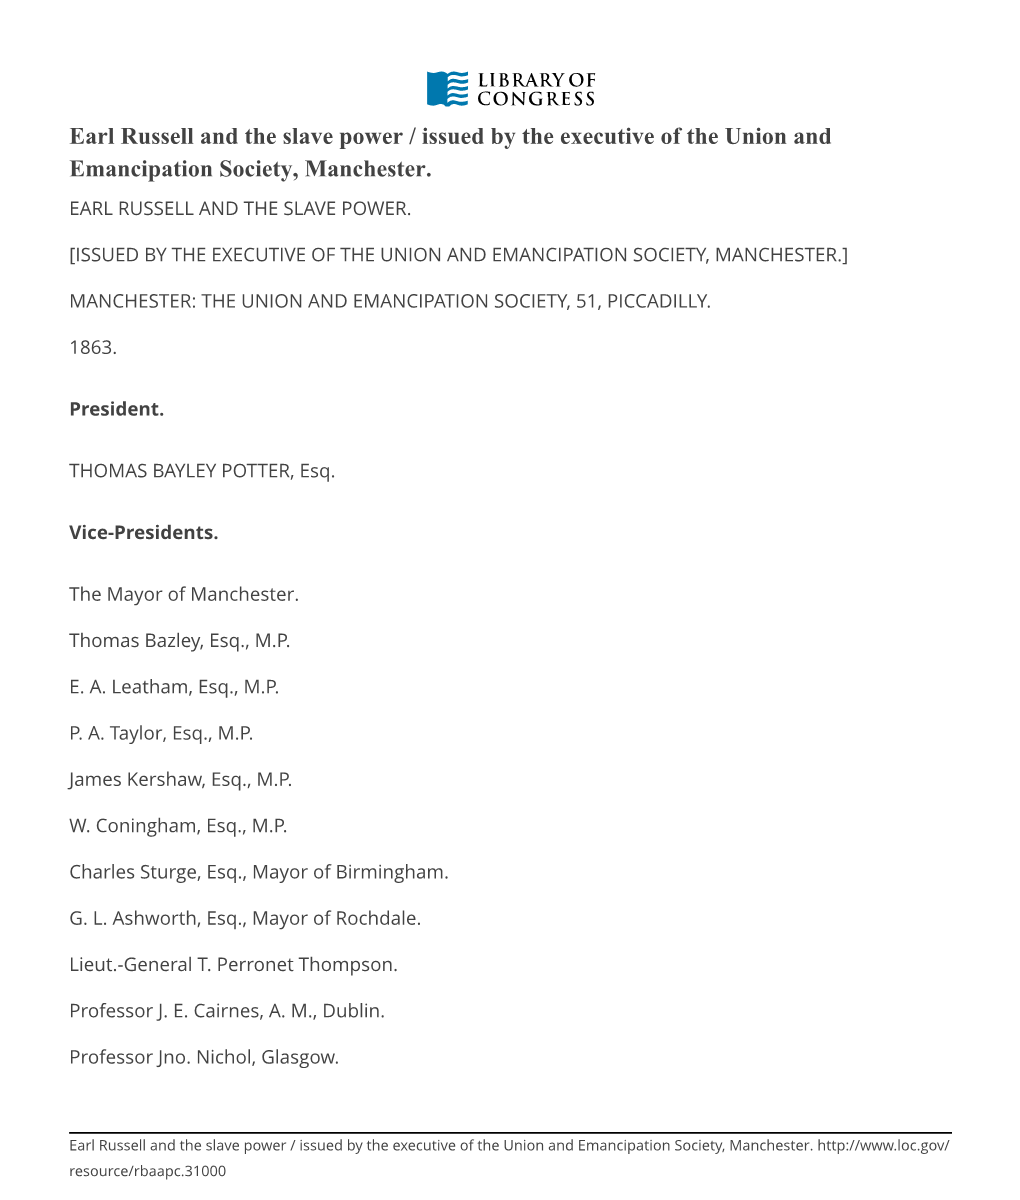 Earl Russell and the Slave Power / Issued by the Executive of the Union and Emancipation Society, Manchester